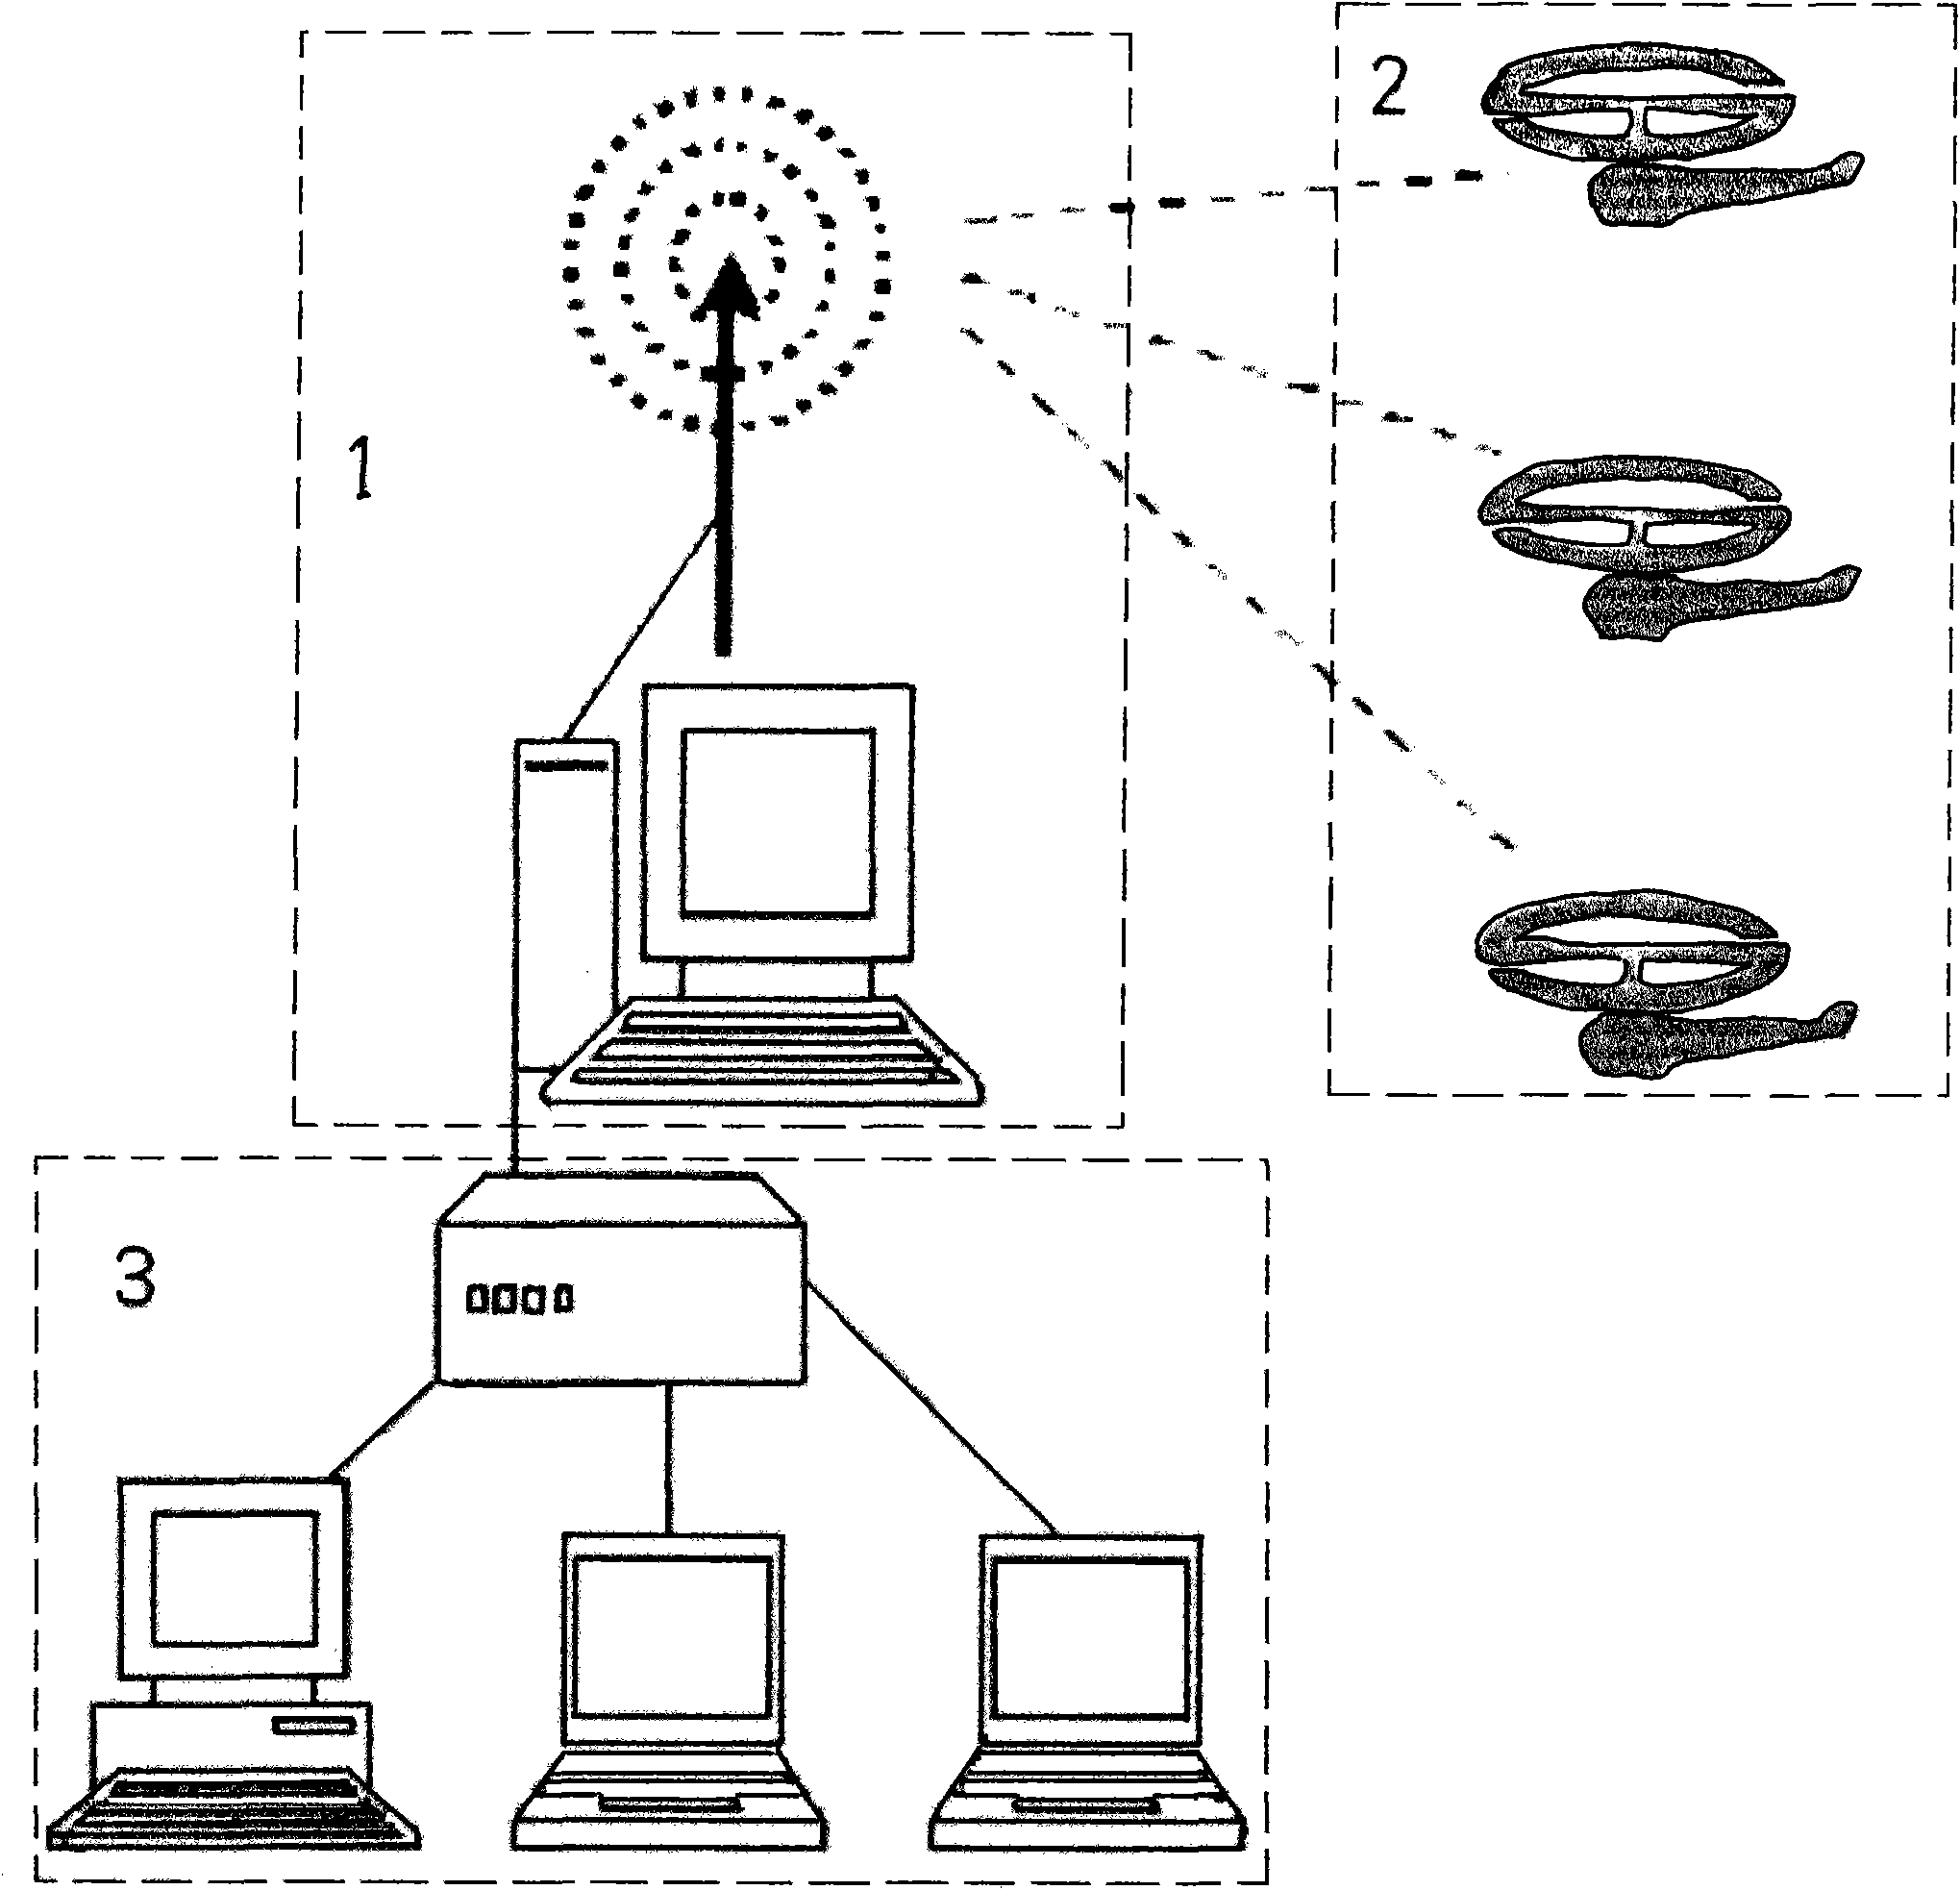 Full-automatic unmanned aerial vehicle control system